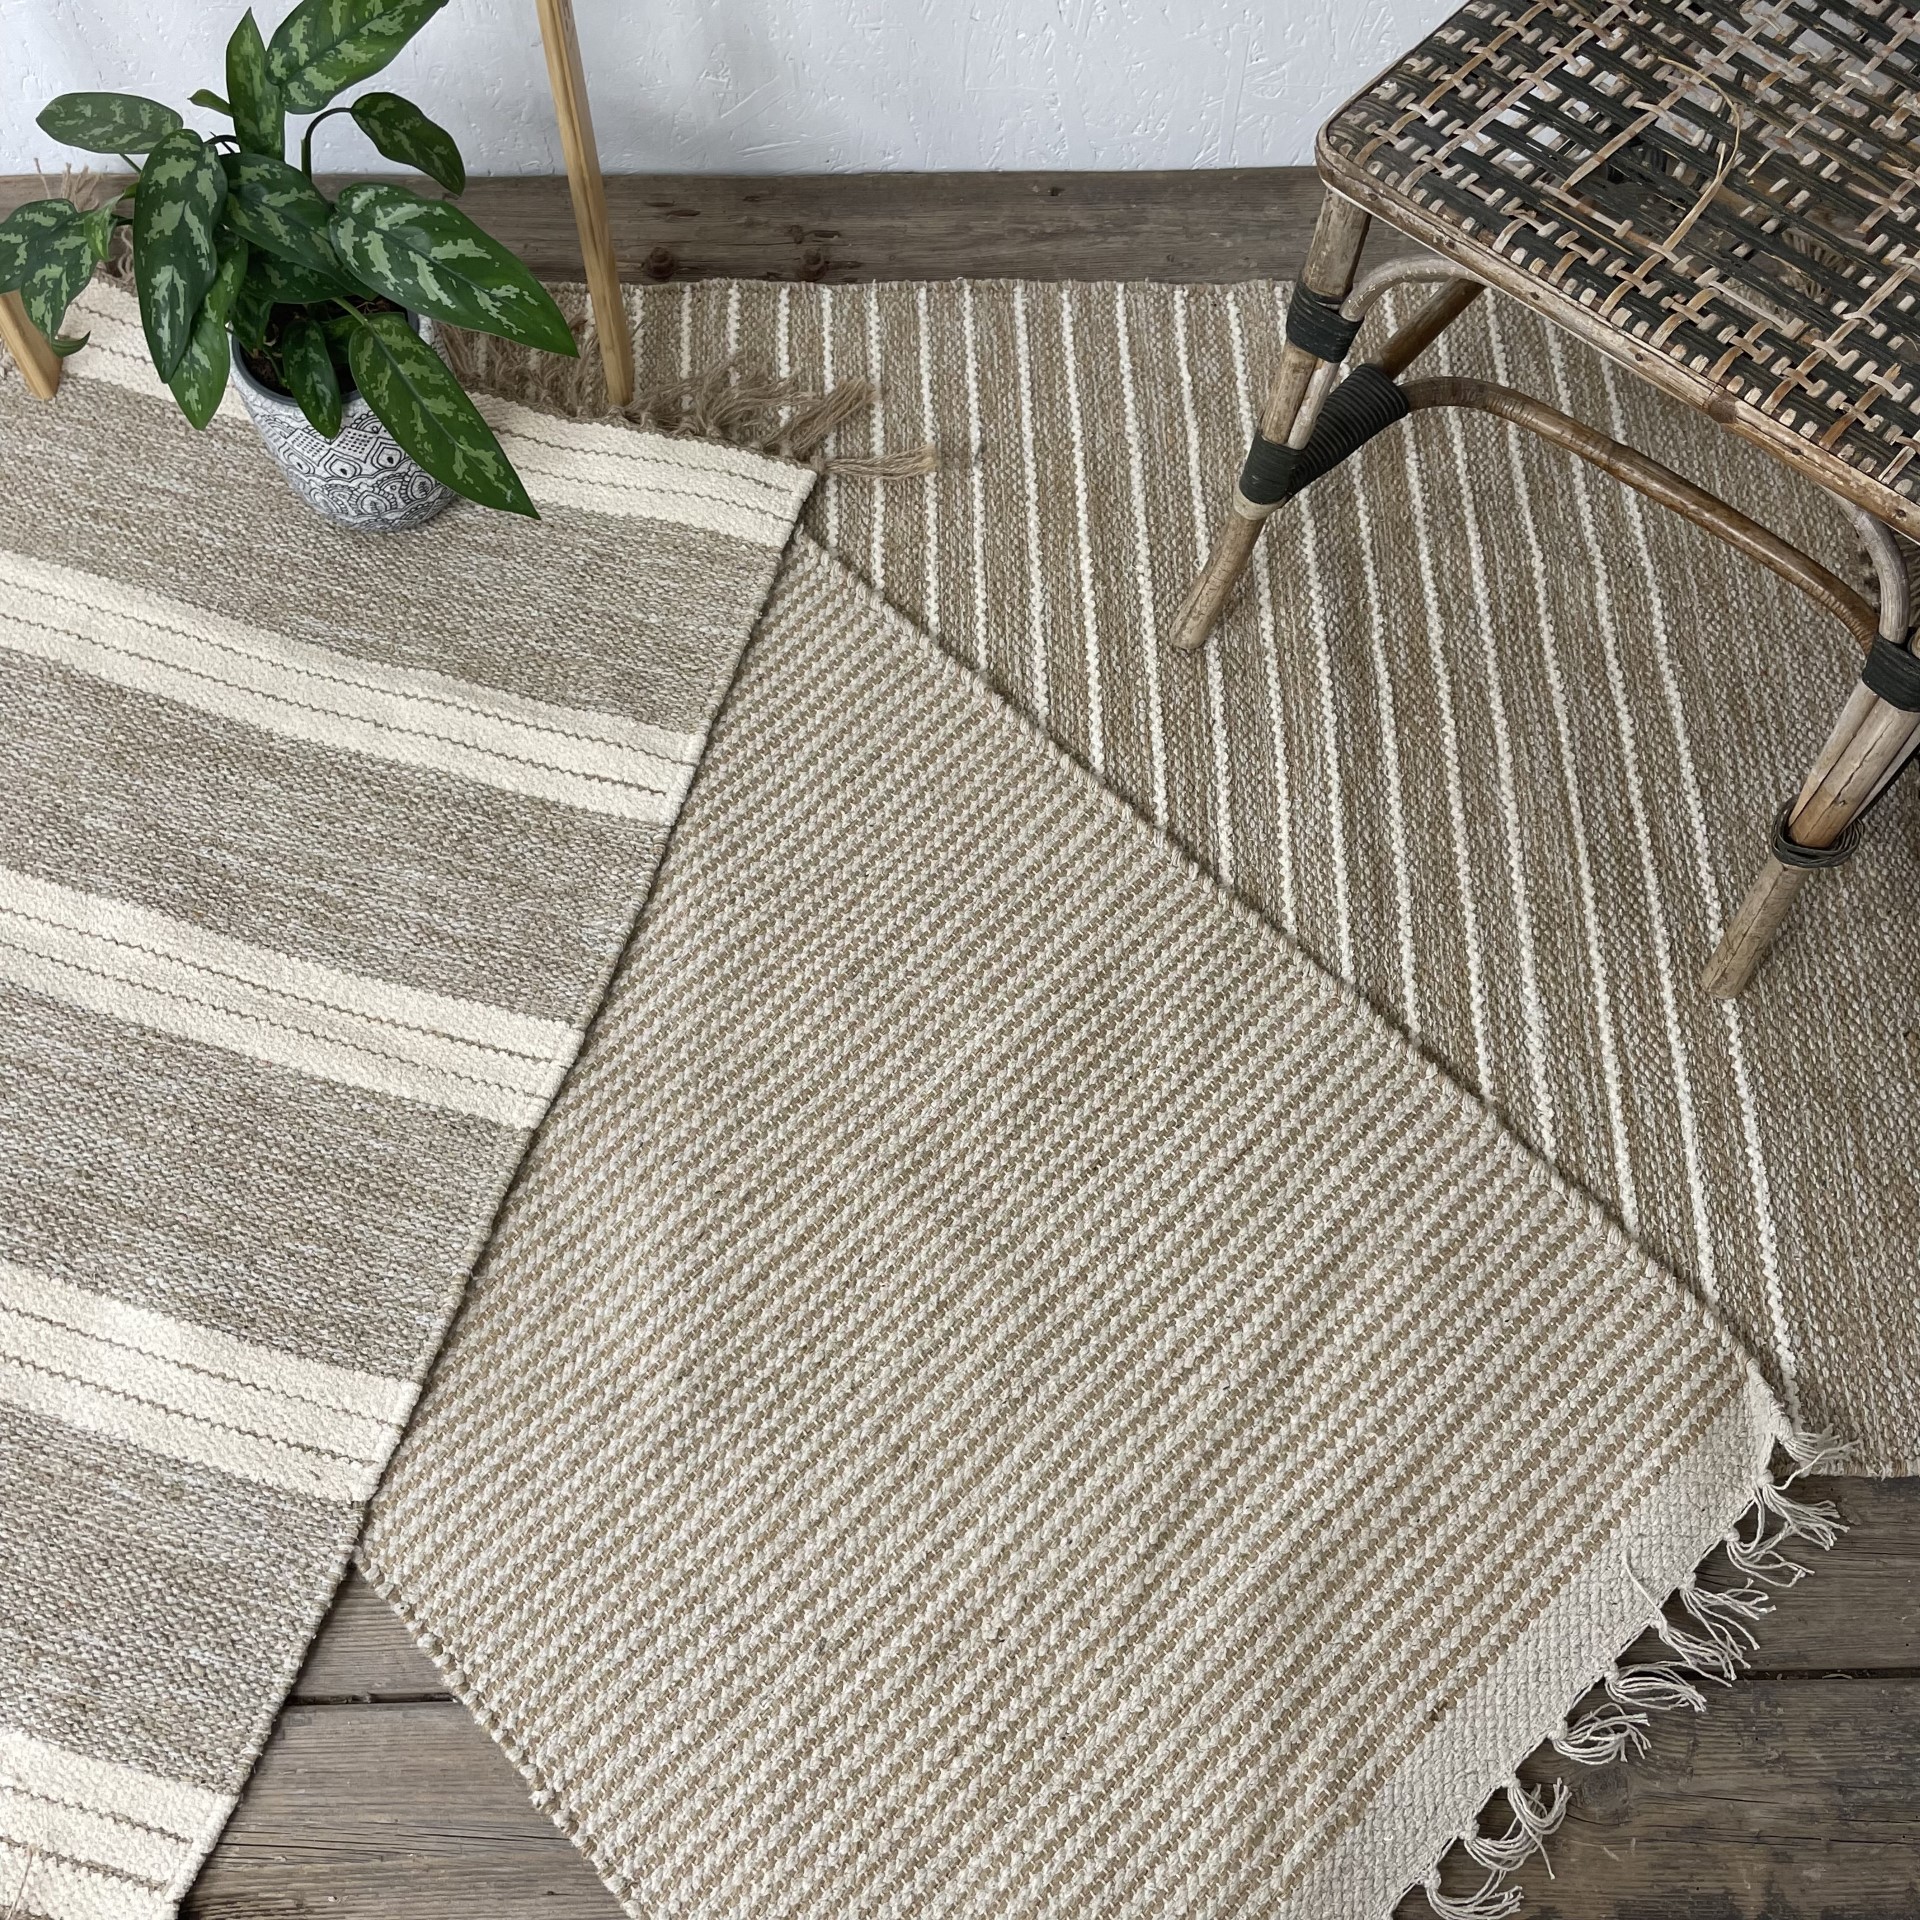 Soft and robust, great rugs for any room!